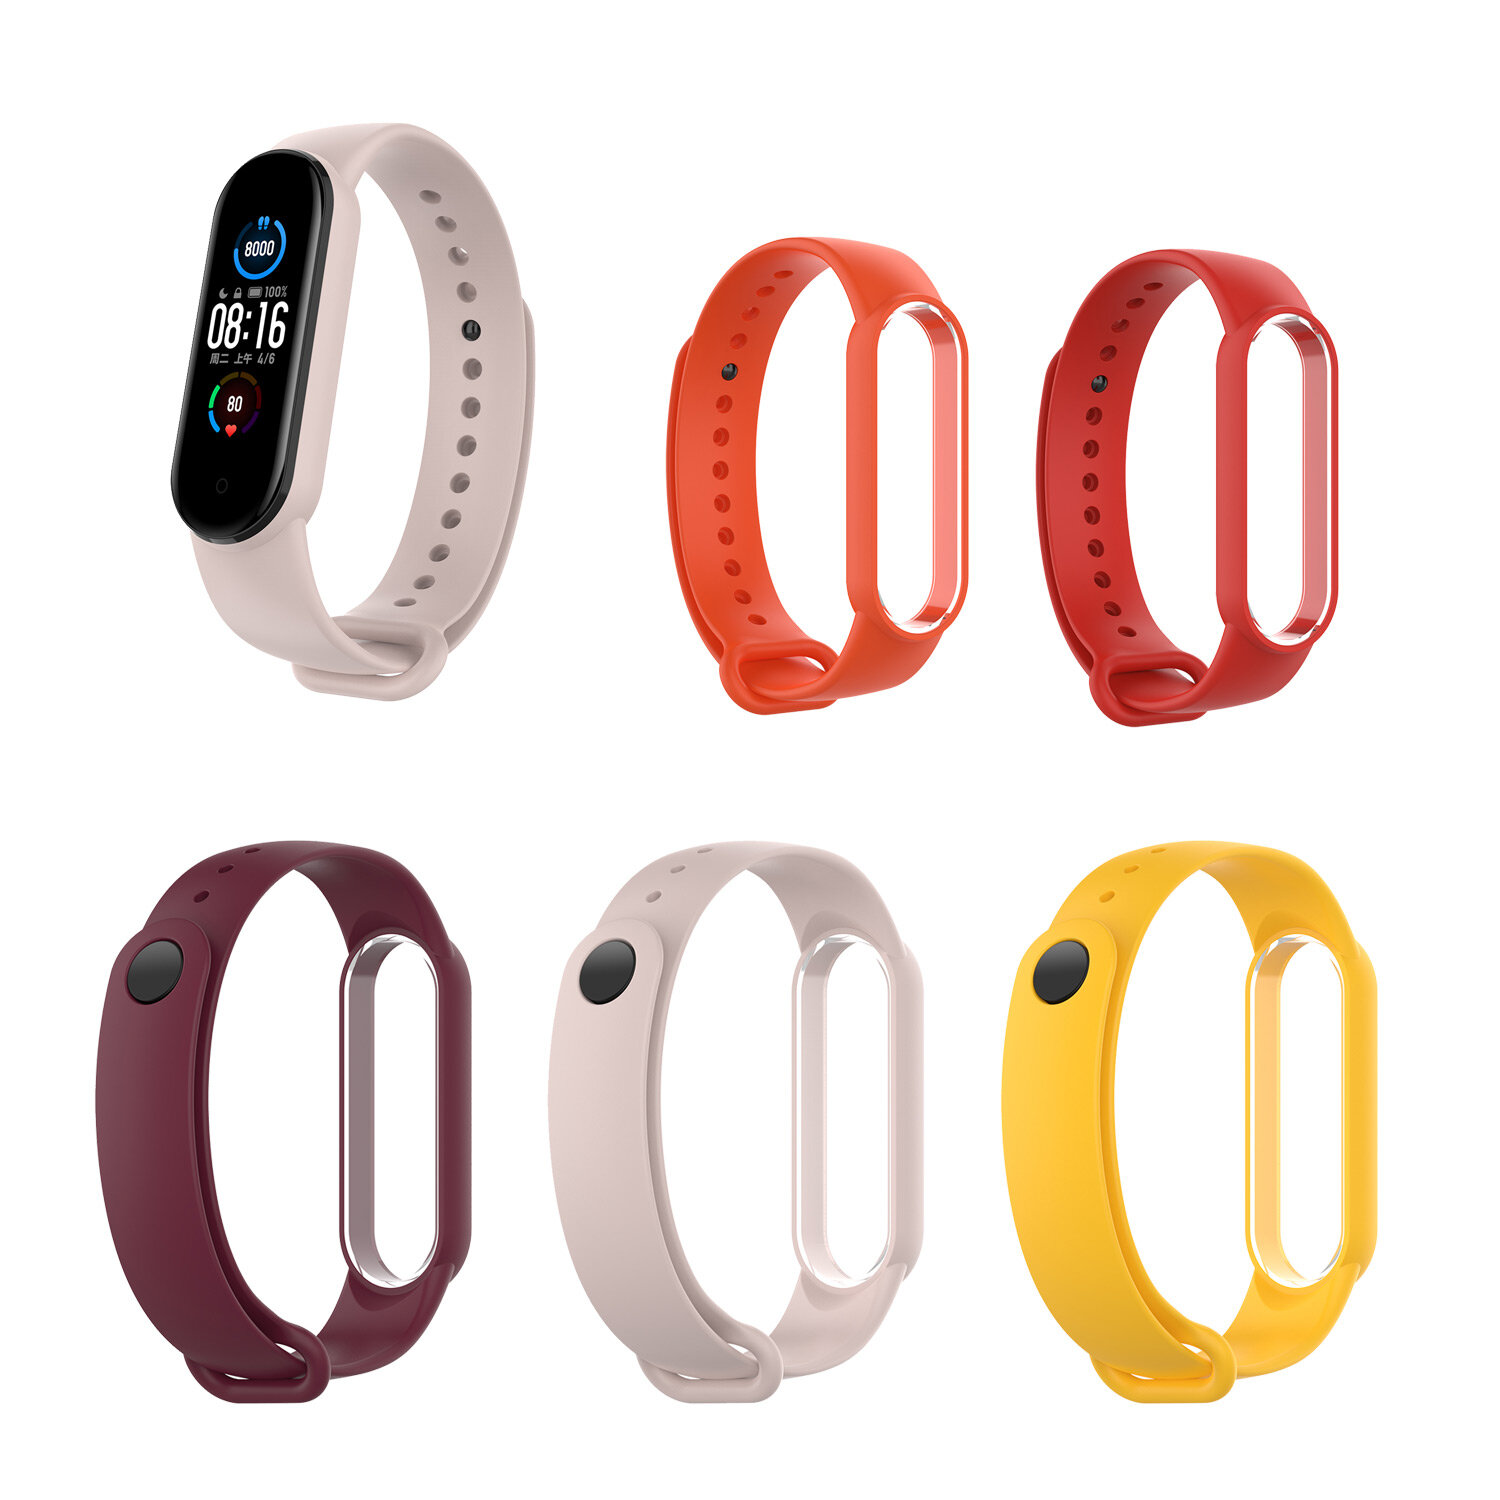 Bakeey colorful tpu watch band watch strap replacement for xiaomi miband 5 non-original